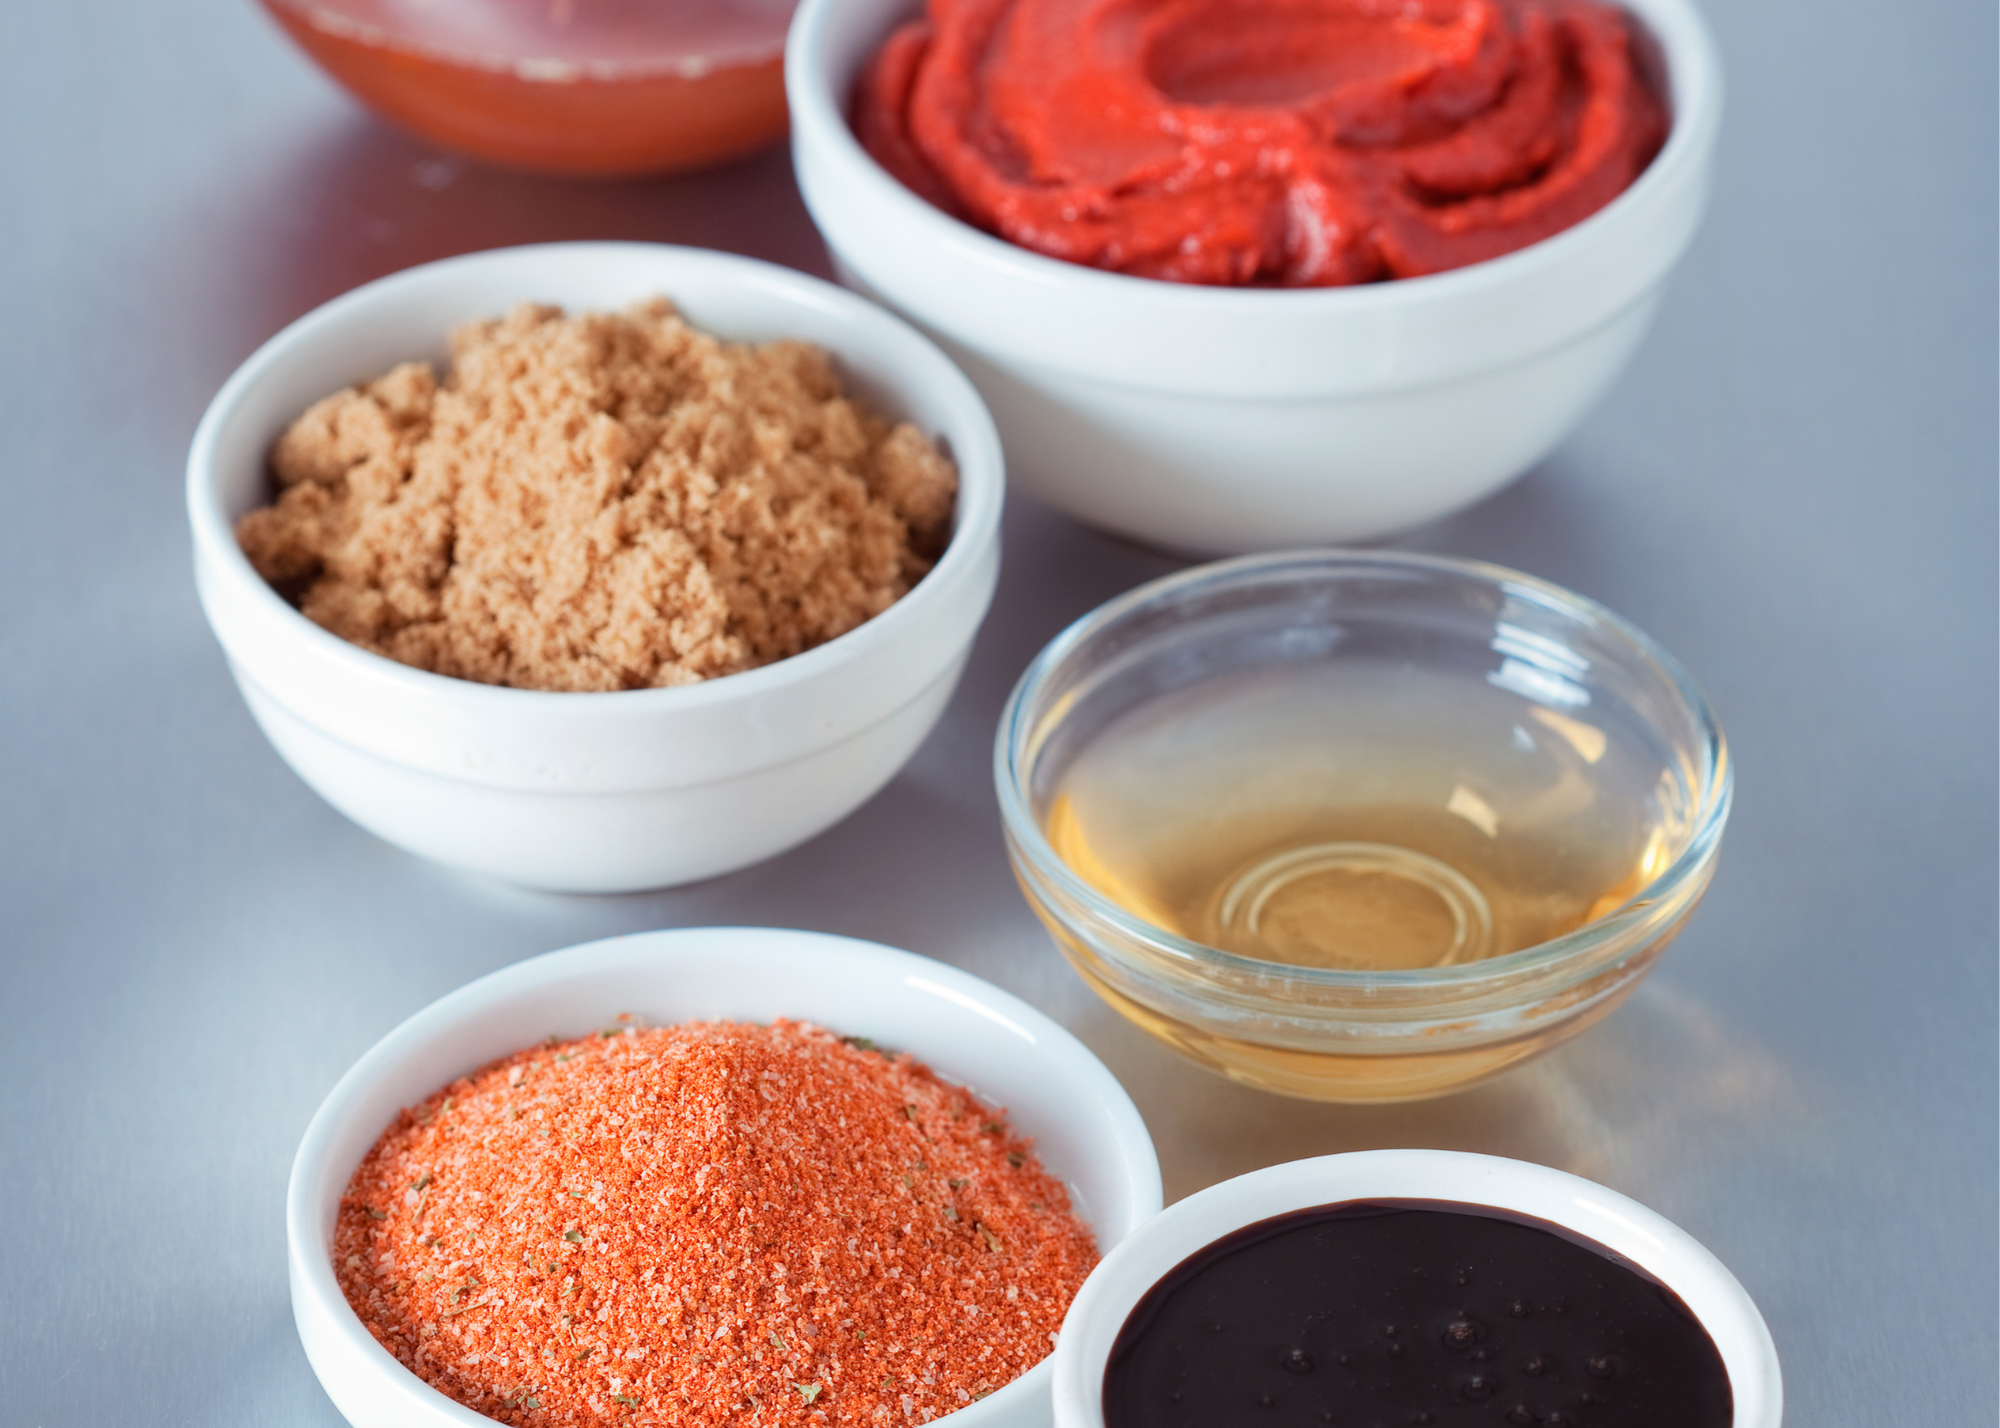 BBQ Sauce Making Kit (Gift Idea, DIY Activity, Complete set to Make Your  Own BBQ Sauces and Dry Spice Rub). Recipes, Ingredients, Containers and